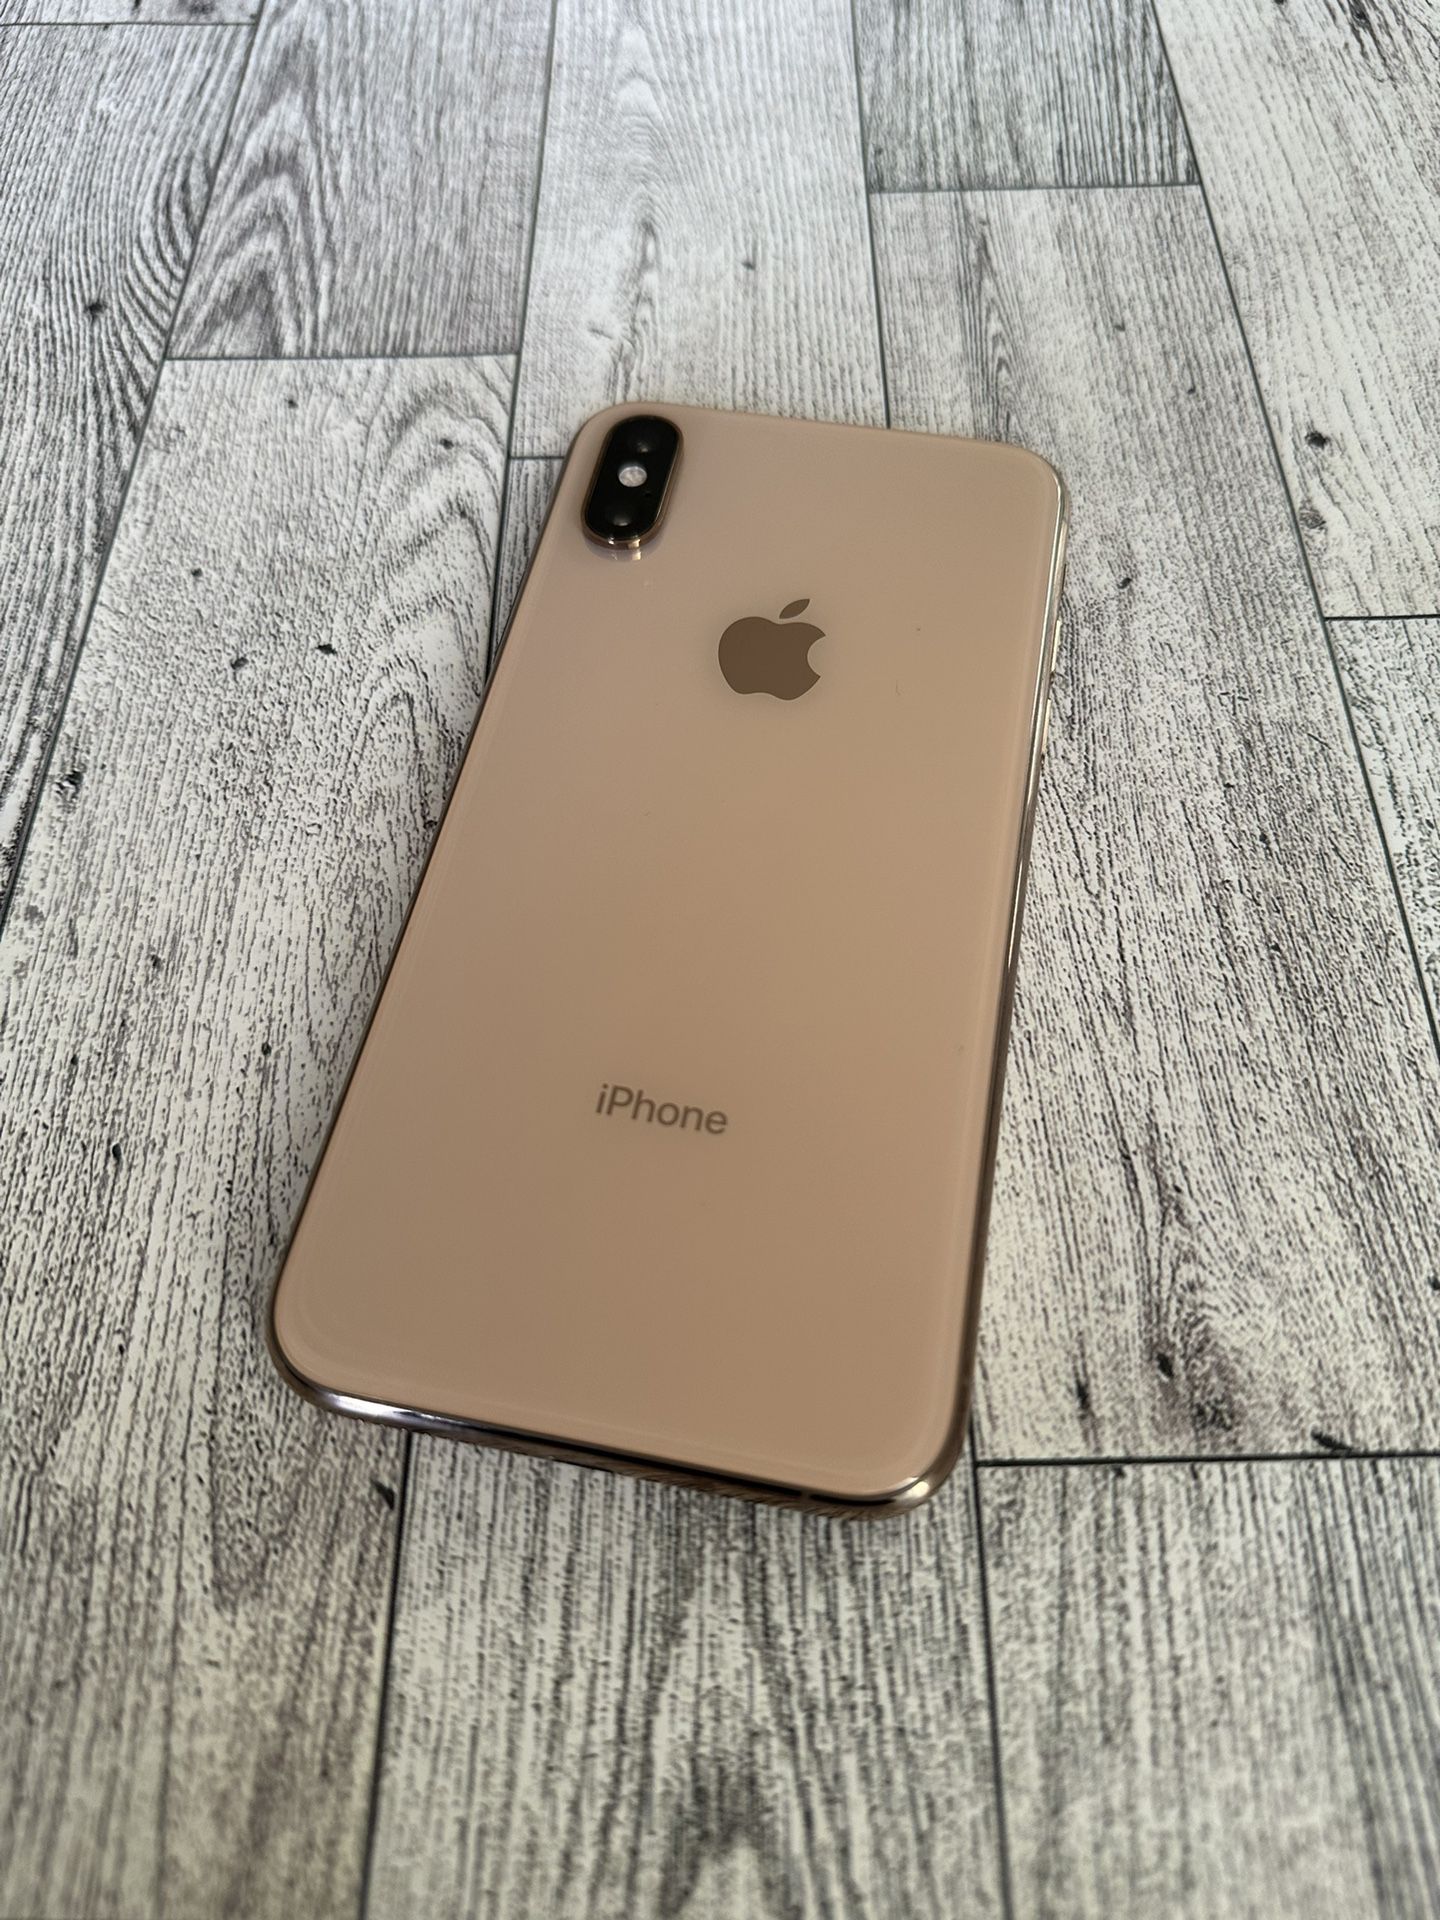 🔥Apple iPhone XS (256GB) UNLOCKED  🌎 DESBLOQUEADO  For All Carriers  🔥